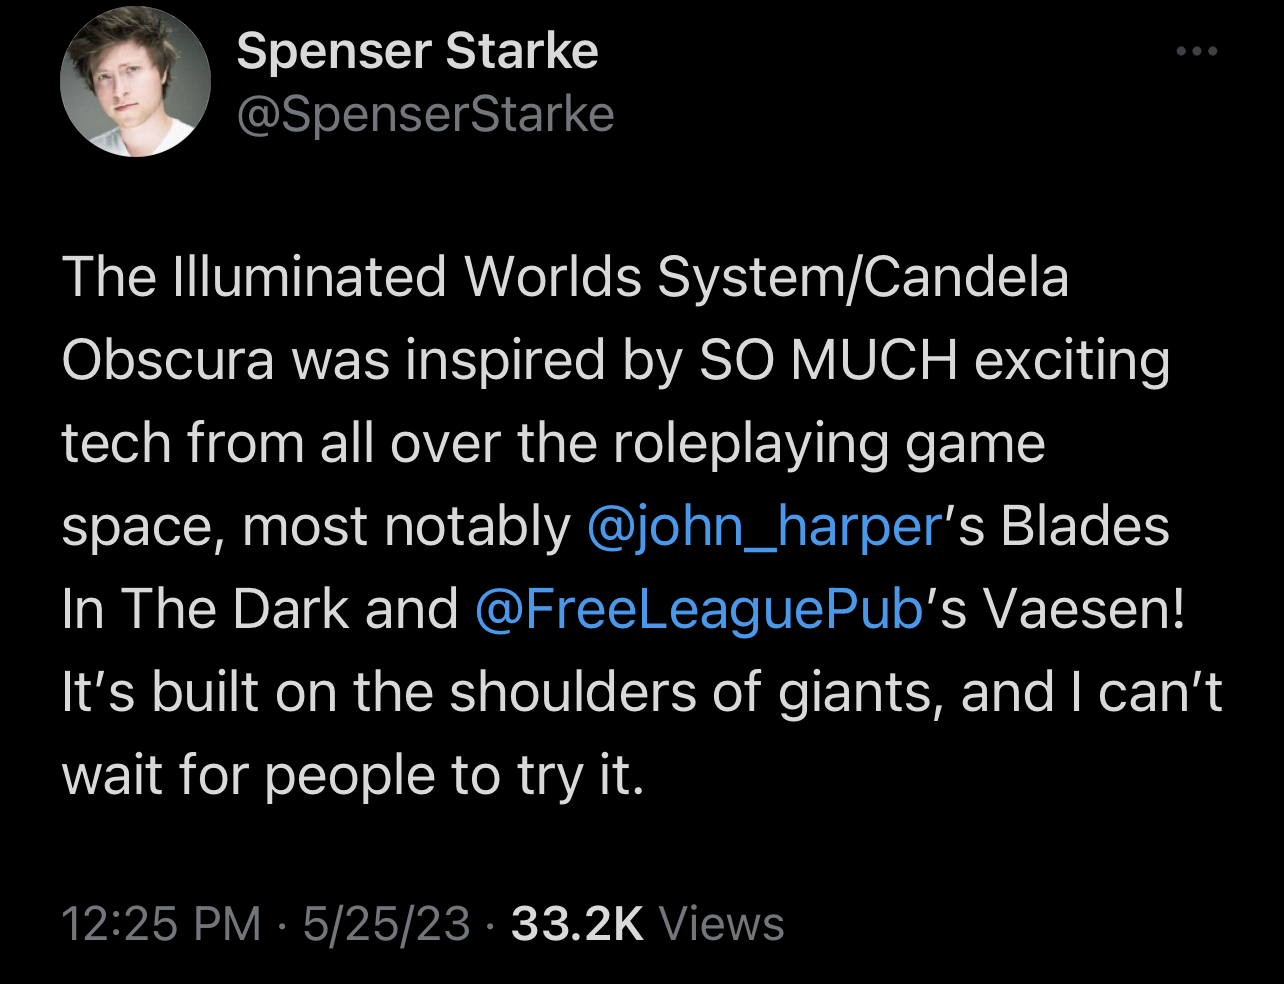 The Illuminated Worlds System/Candela Obscura was inspired by SO MUCH exciting tech from all over the roleplaying game space, most notably @john_harper’s Blades In The Dark and @FreeLeaguePub’s Vaesen! It’s built on the shoulders of giants, and I can’t wait for people to try it.